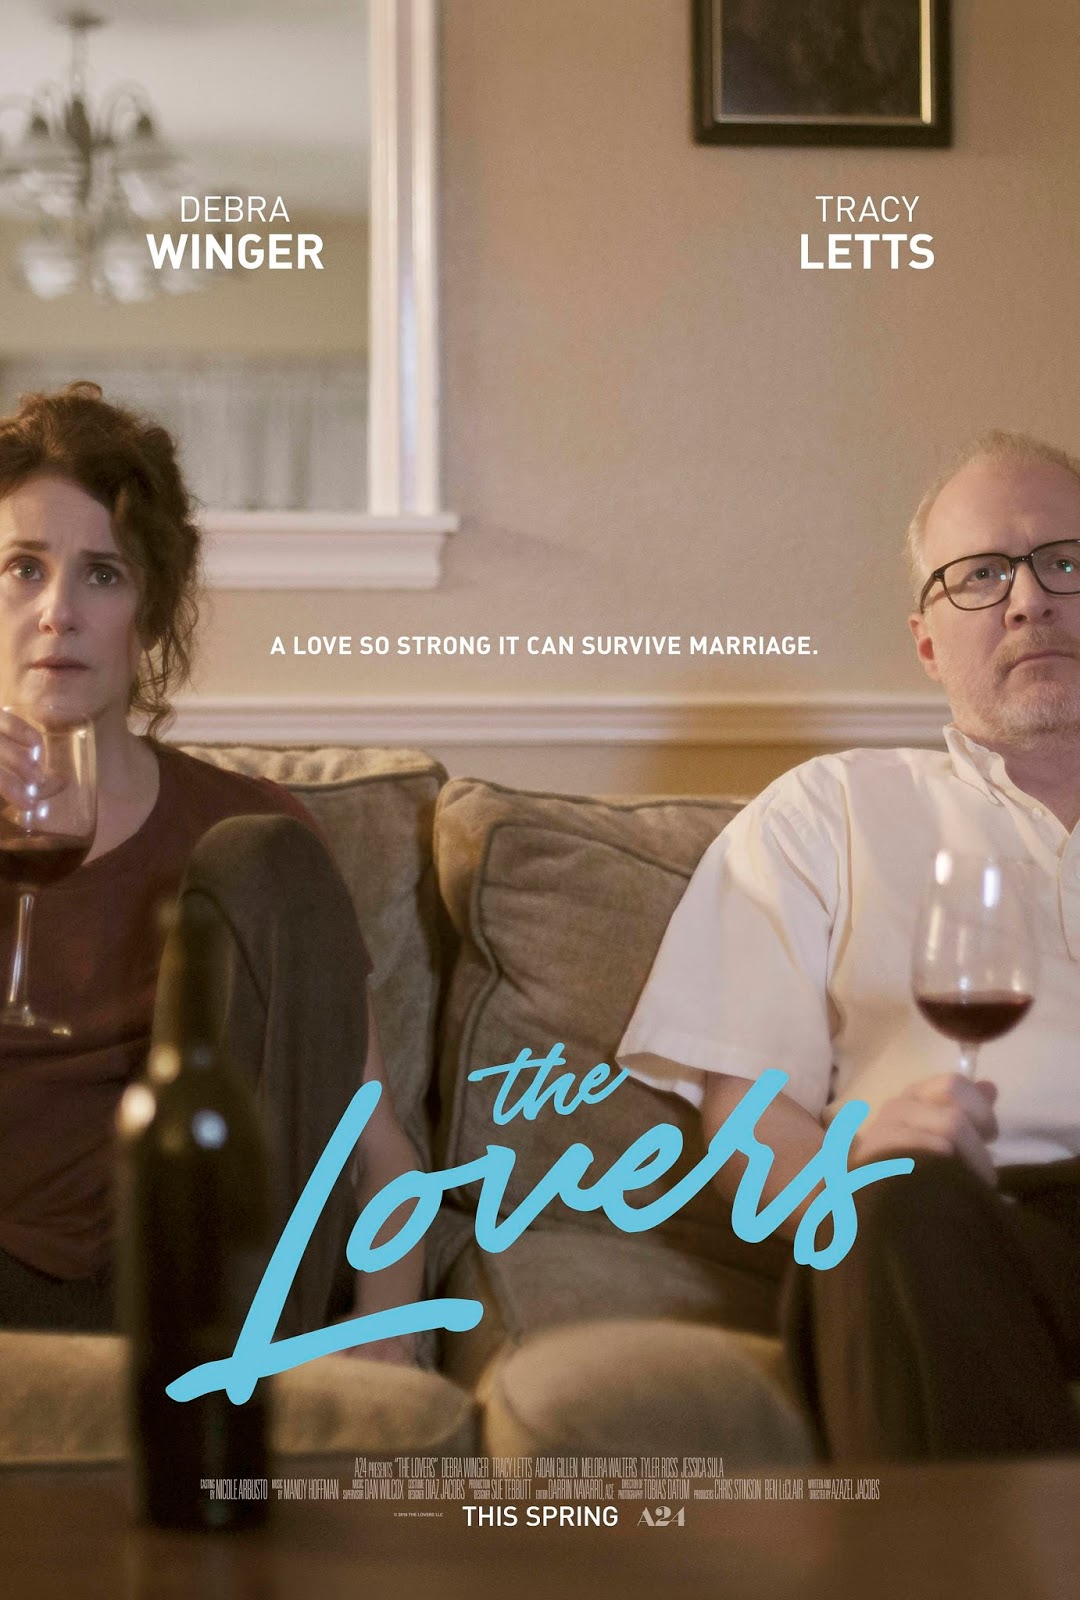 The Lovers 2017